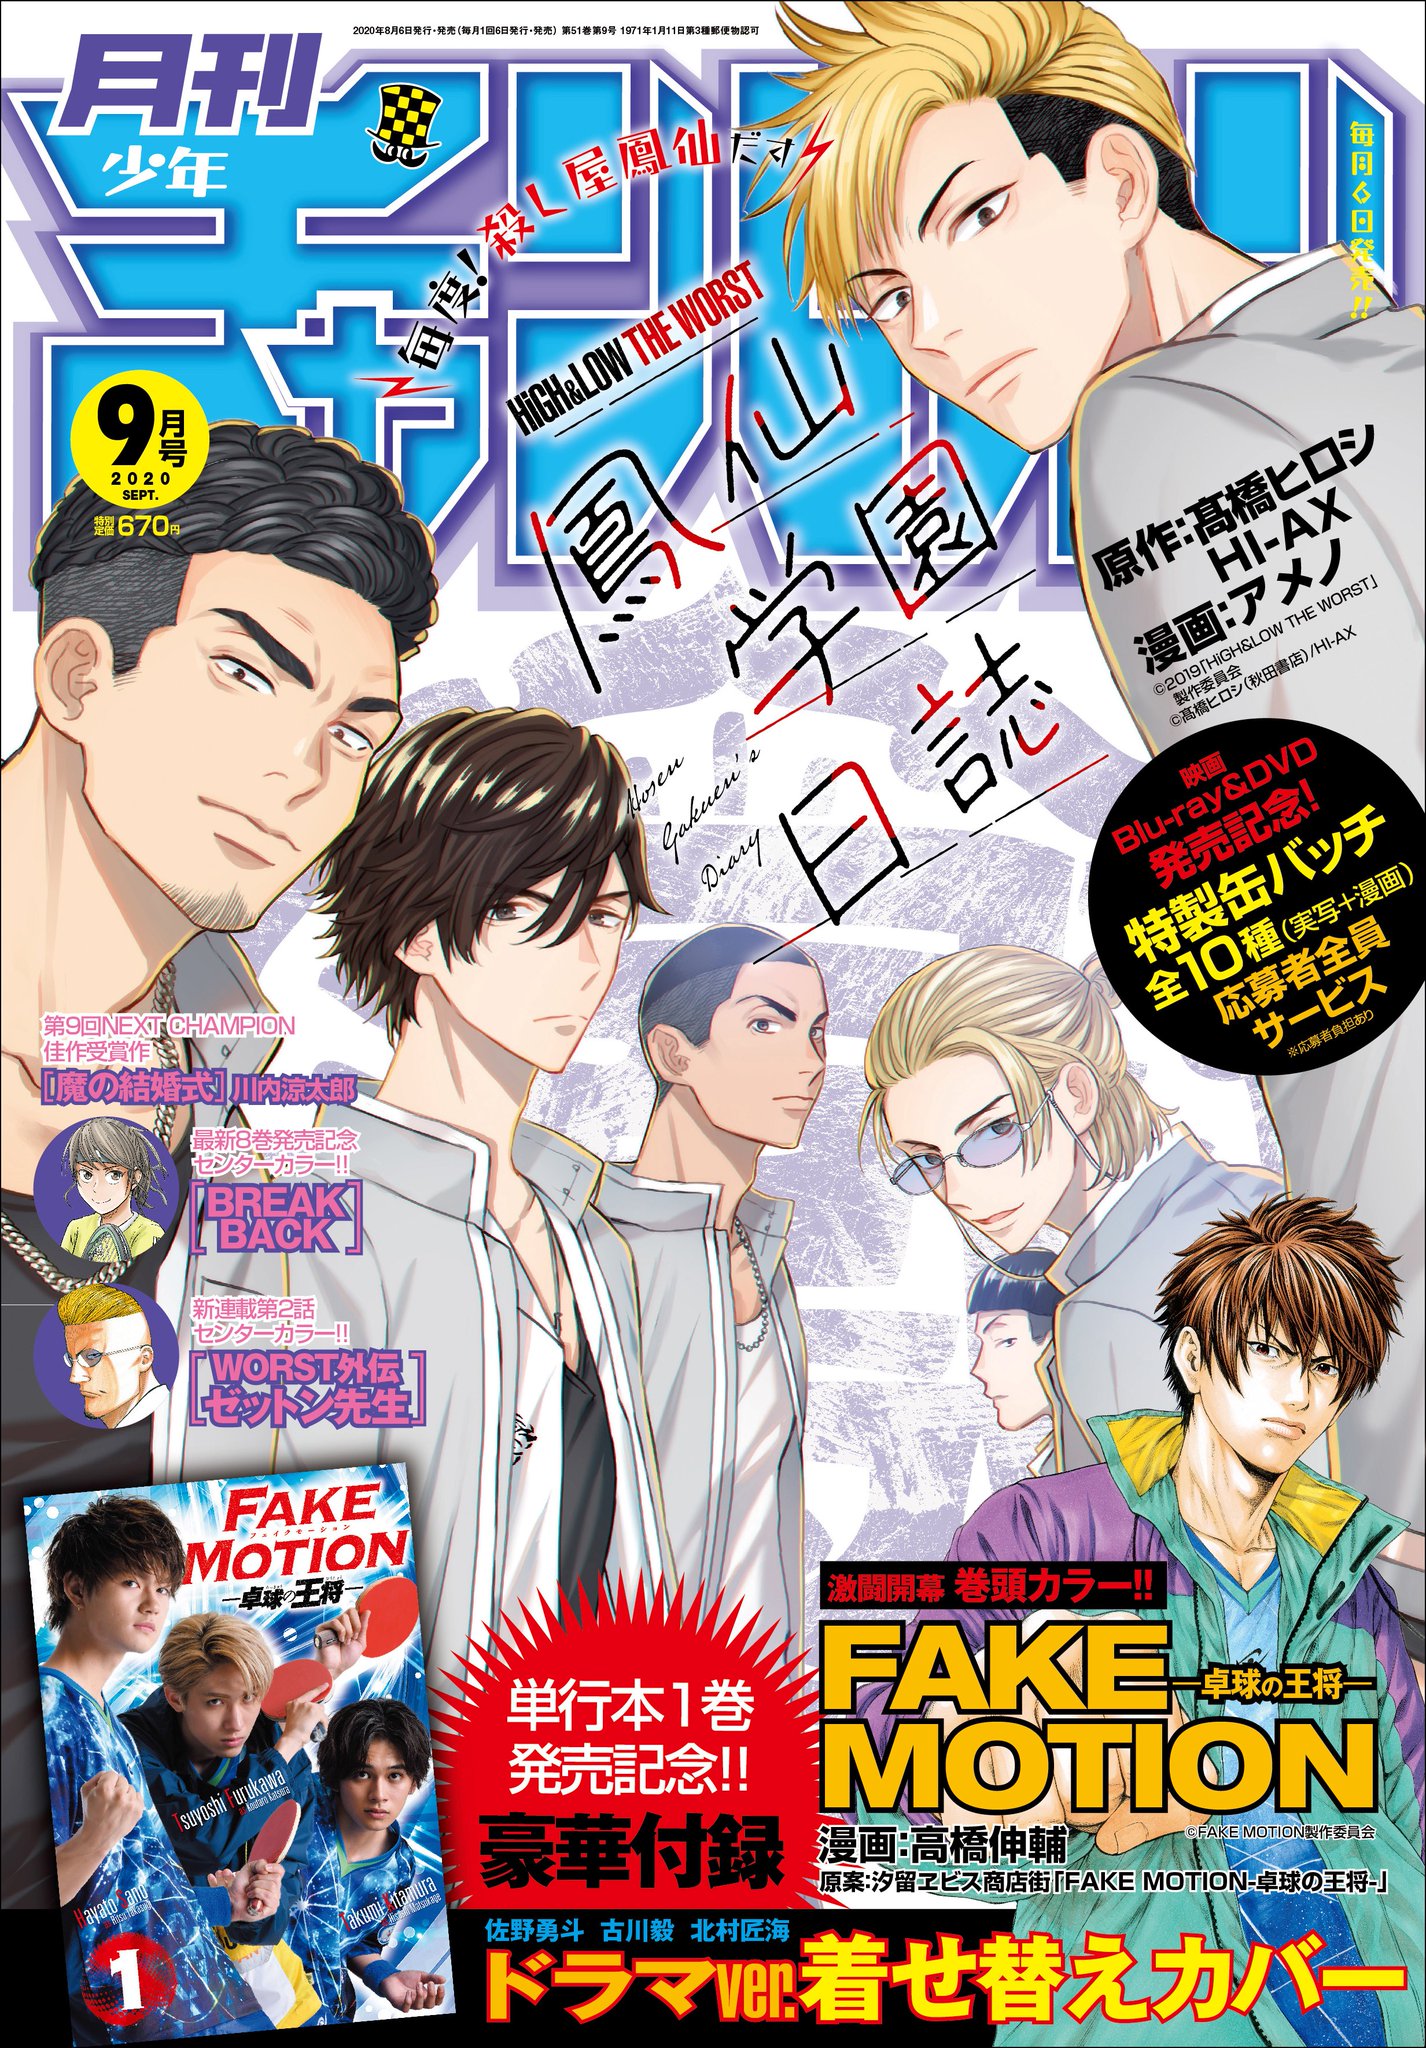 Manga Mogura High Low The Worst Housen Gakuen Nikki By Ameno Is On The Cover Of The Upcoming Monthly Shonen Champion Issue 9 Ochikobore By Ta Shi Is On The